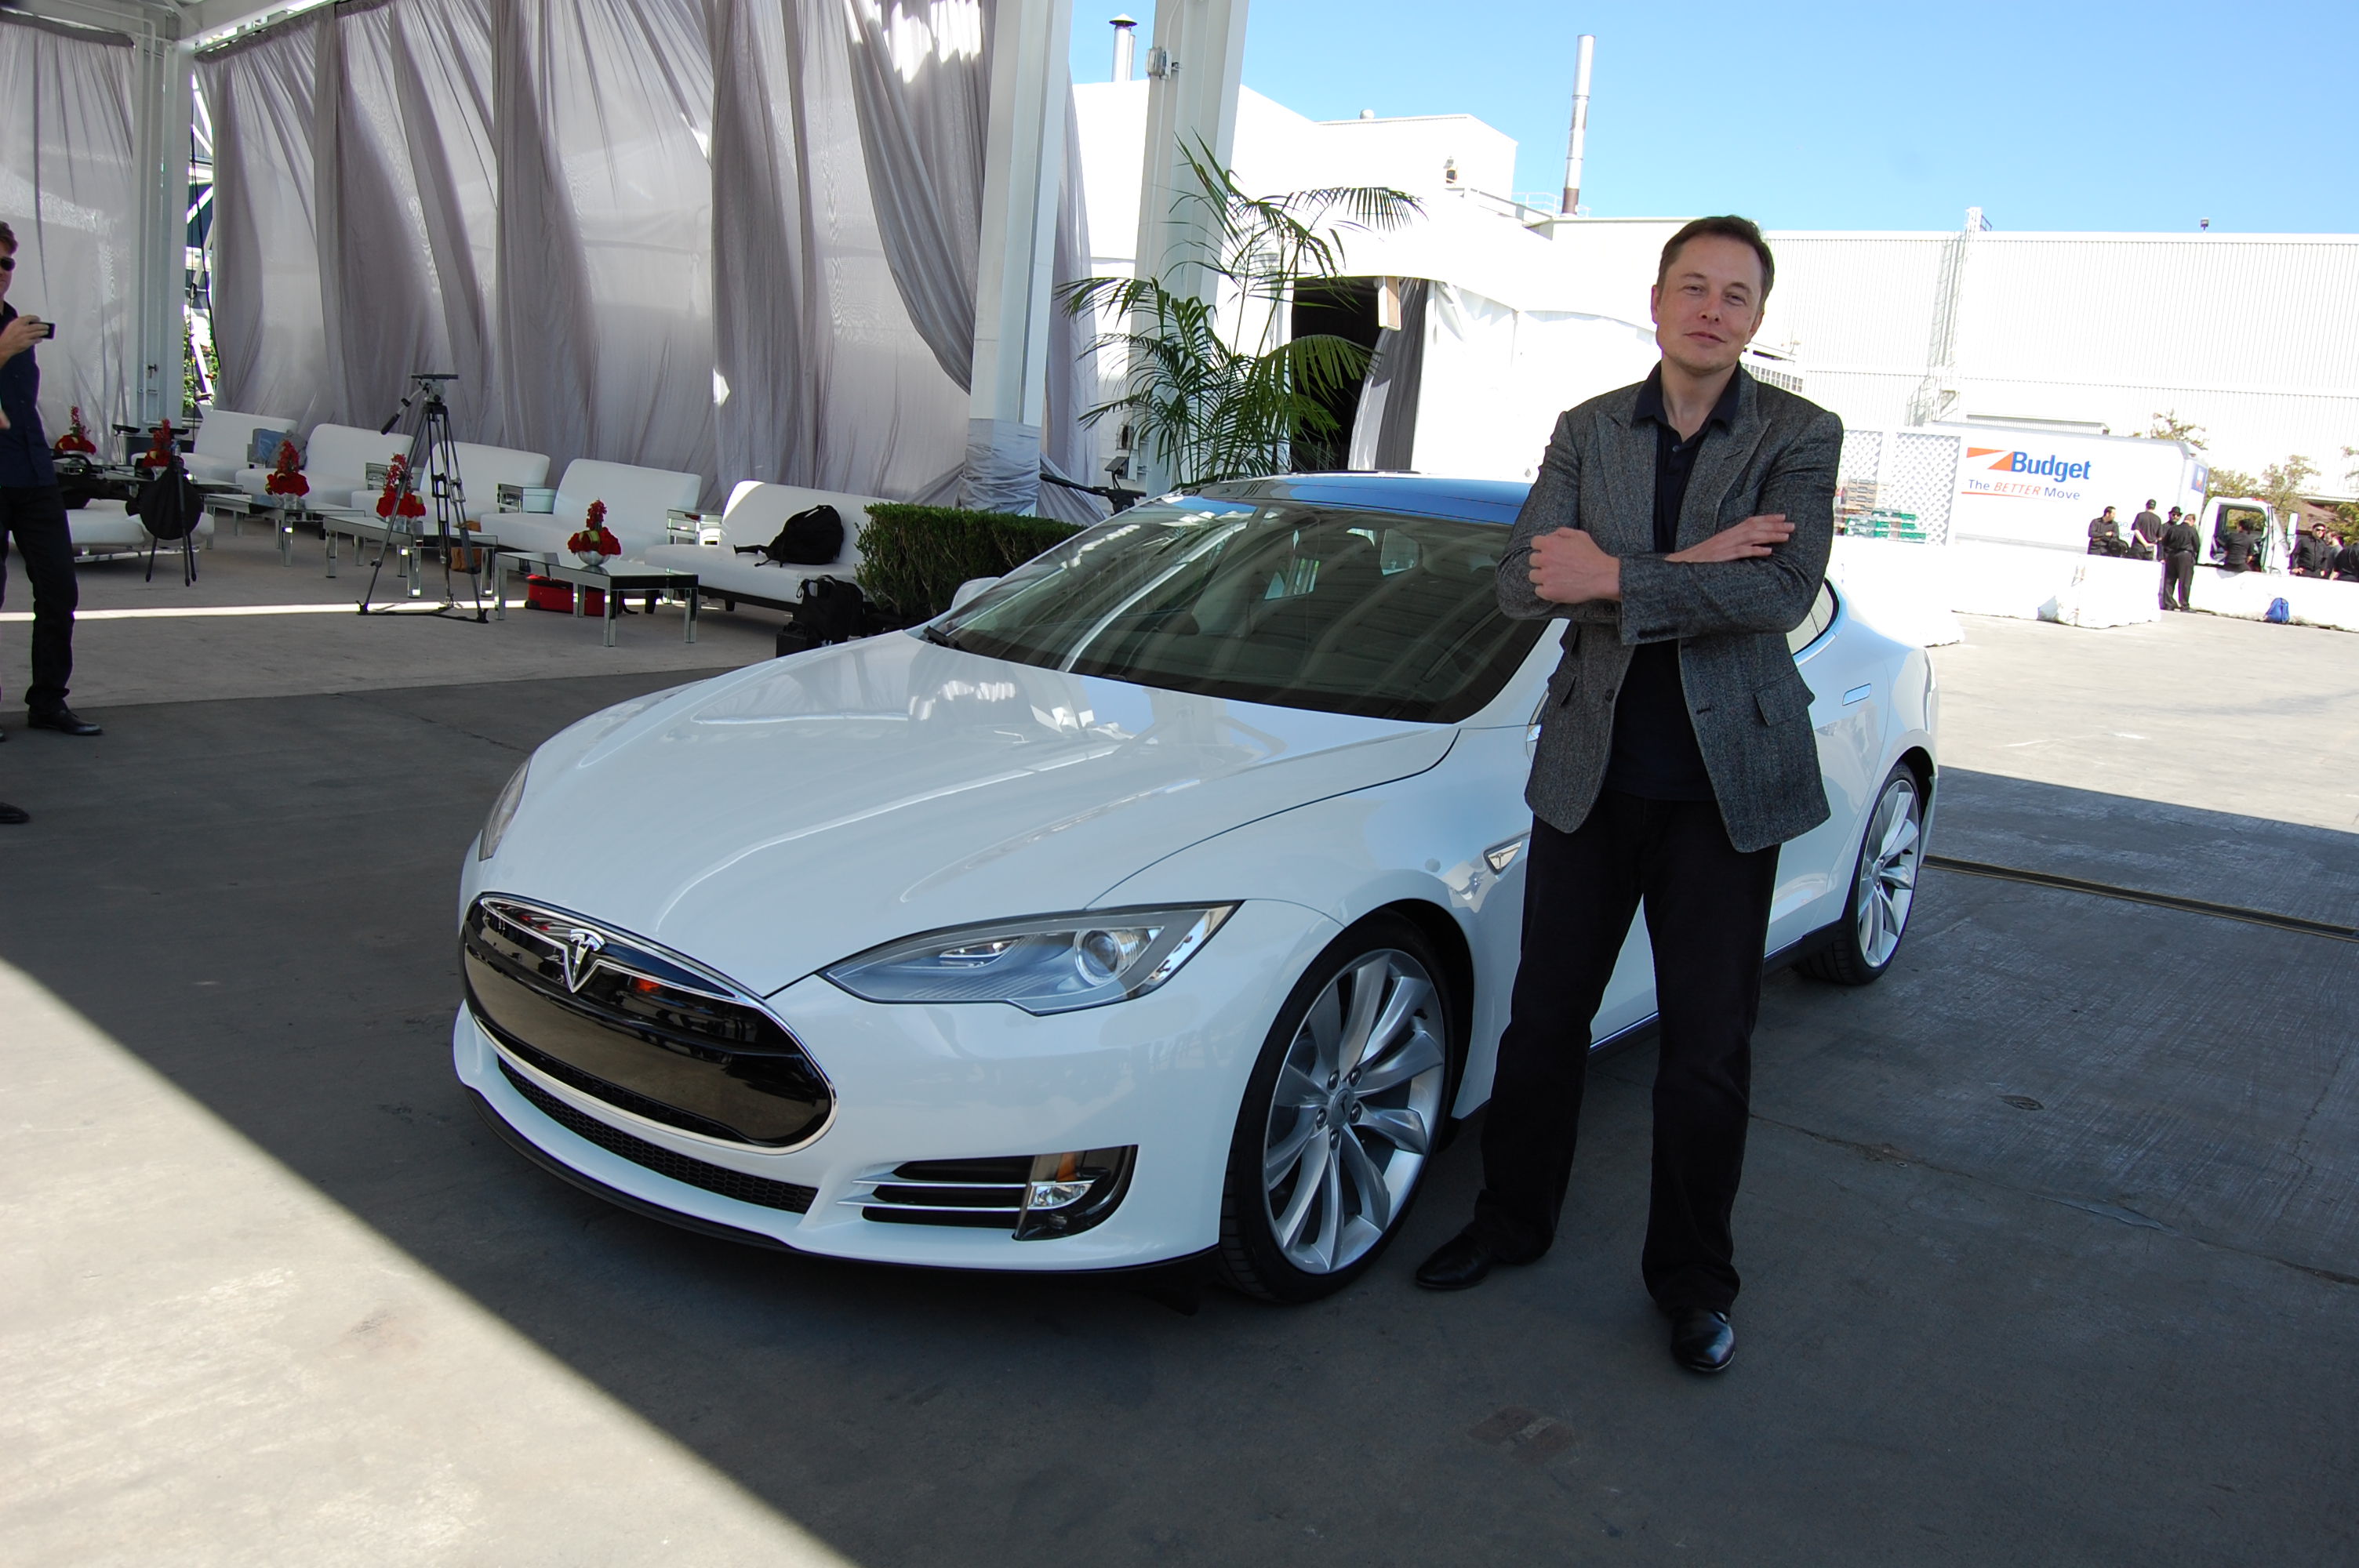 Musk hanging out at Tesla factory back in 2011. Image via Wikimedia Commons